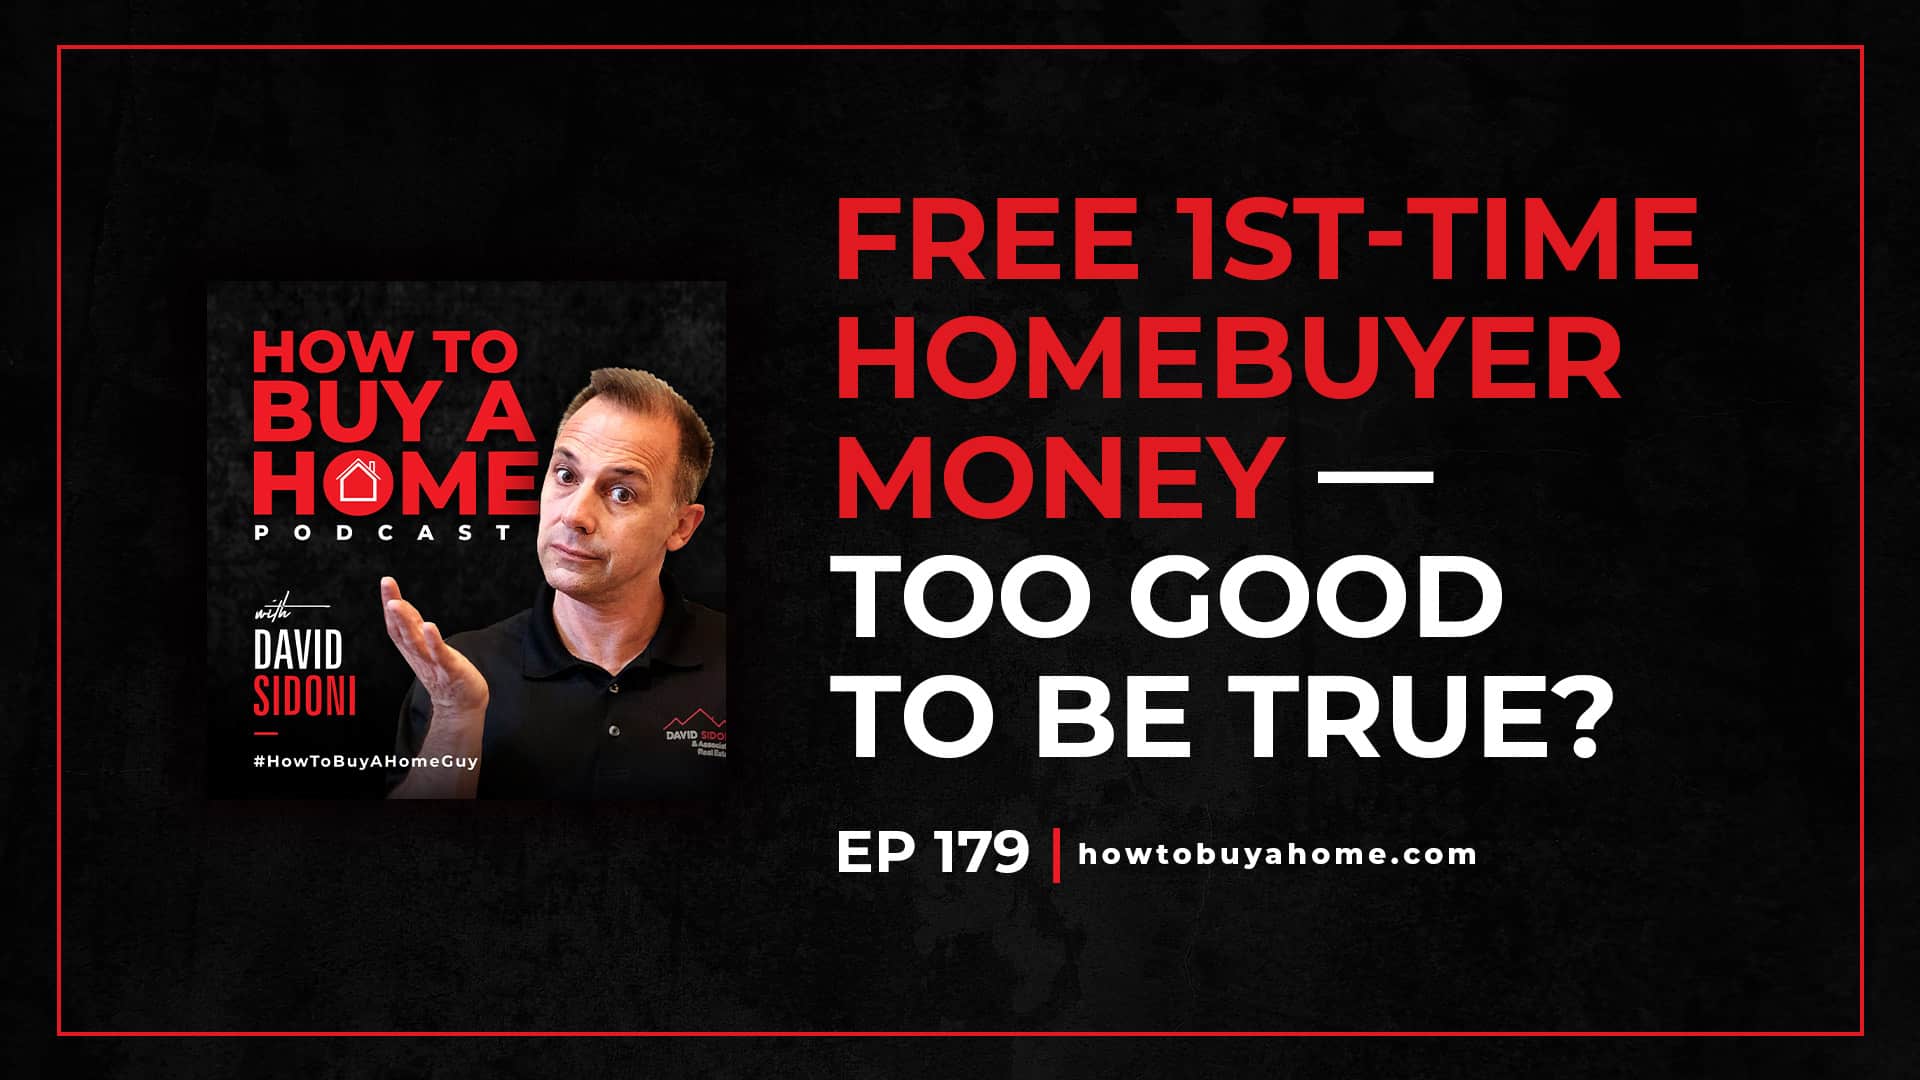 Ep. 179 – FREE 1st Time Home Buyer Money – Too Good to be True